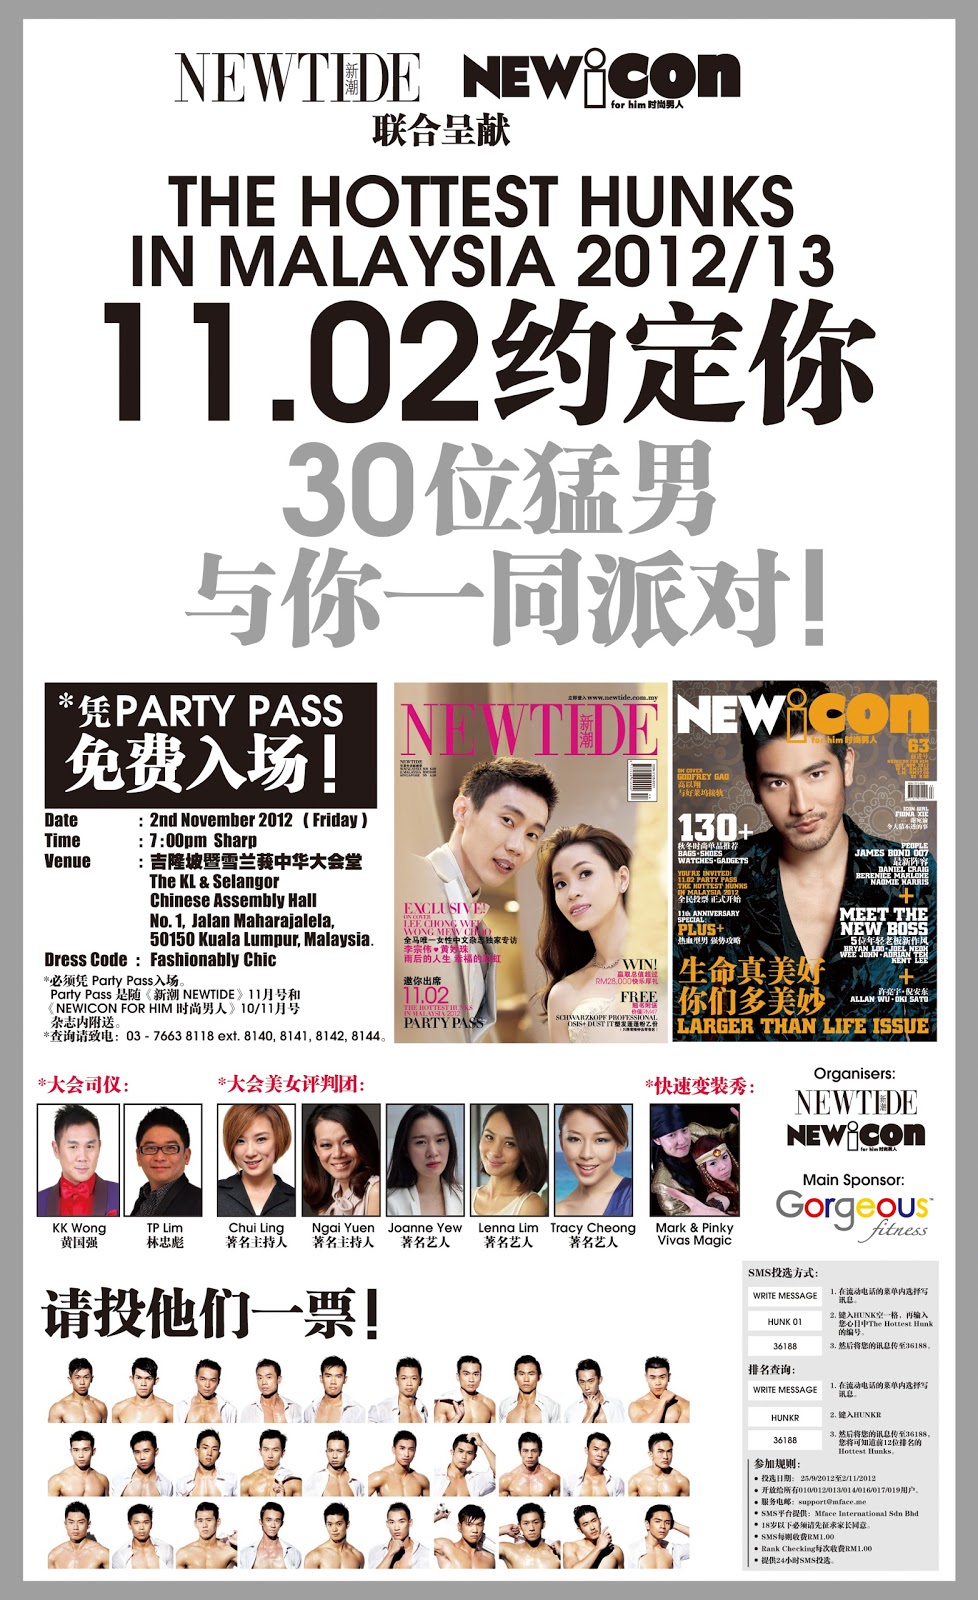 THE HOTTEST HUNKS IN MALAYSIA 2012 时尚猛男派对  11.02 热力登场